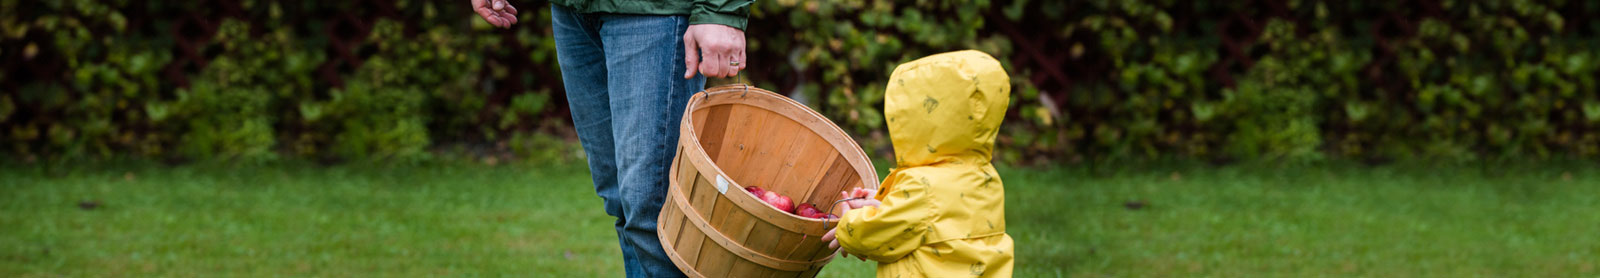 Photo of a parent and child, holding a wooden bushel of apples at an orchard